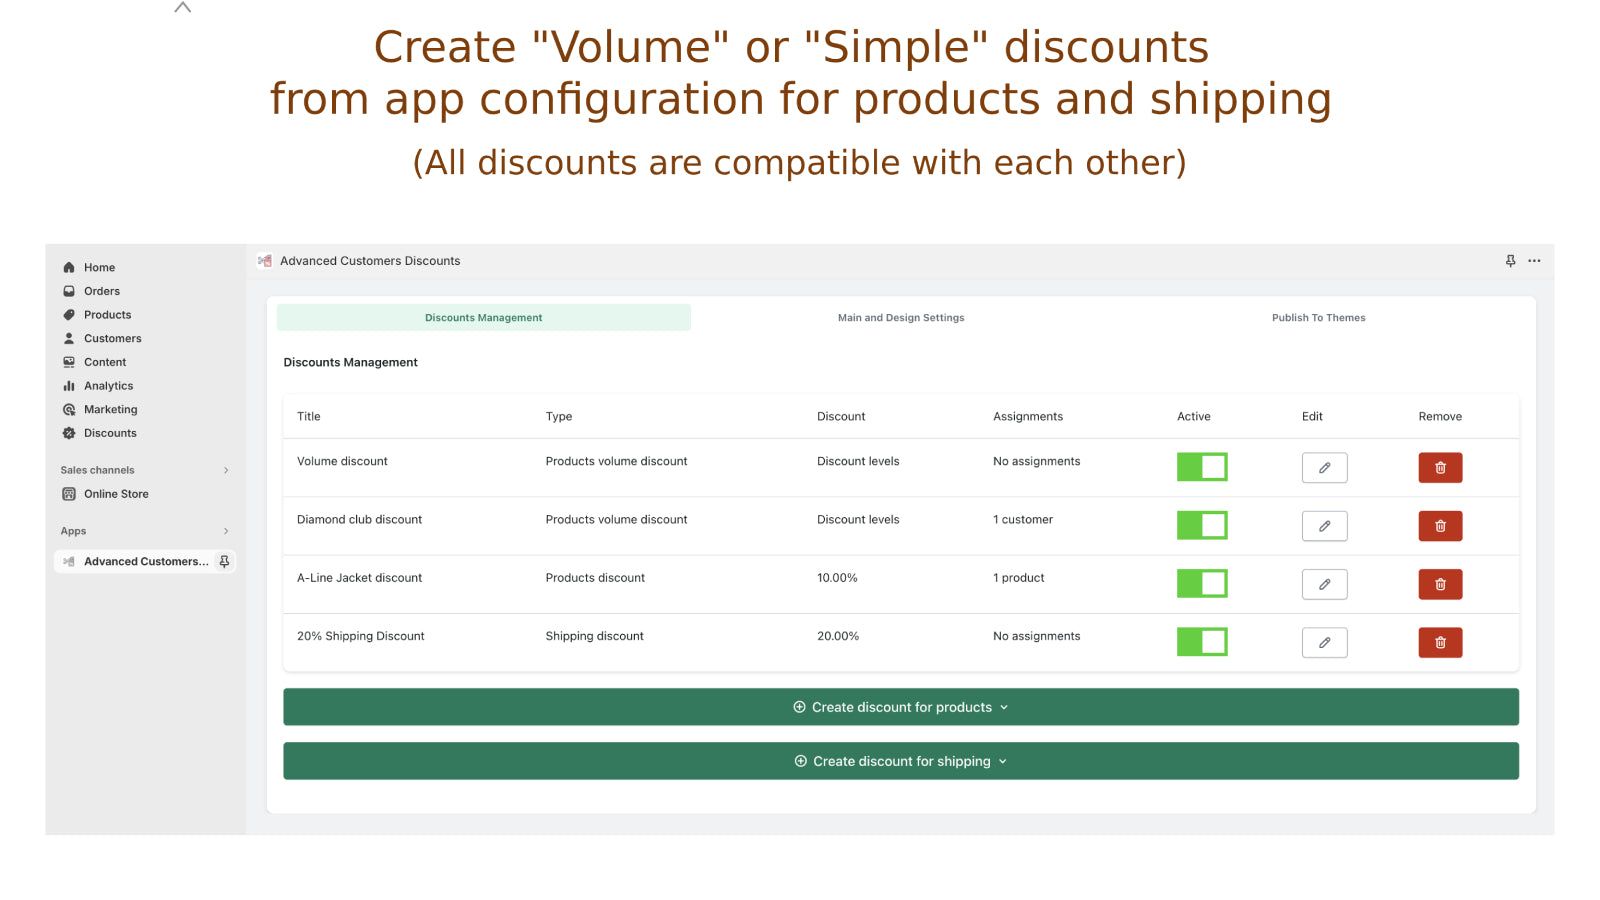 Create simple or volume discounts for products and shipping